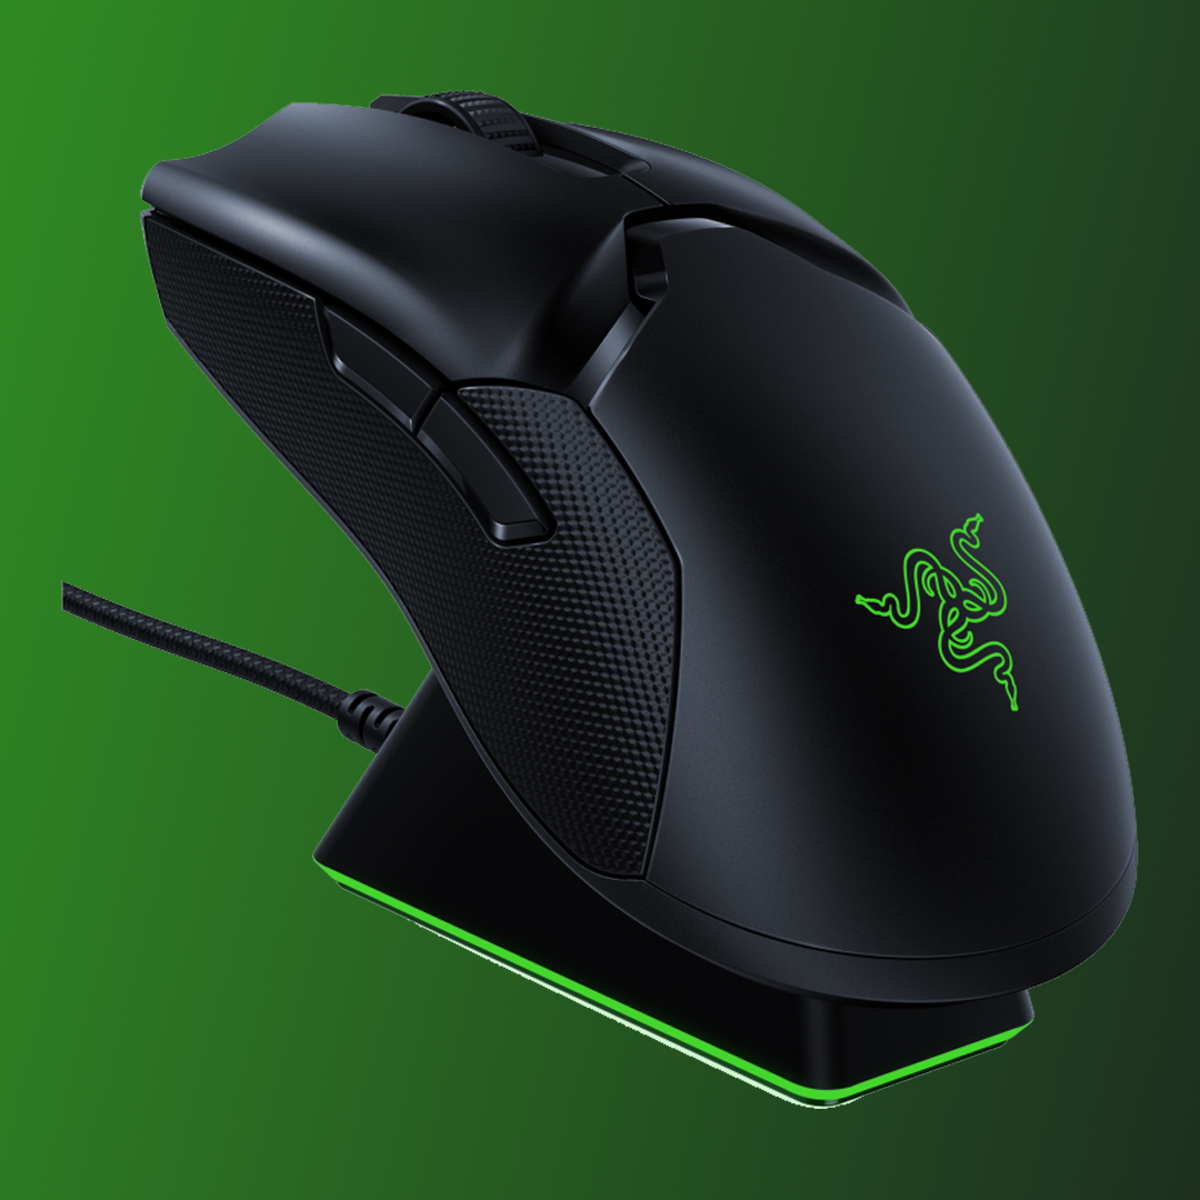 Erm, Razer's Viper Ultimate wireless gaming mouse is 72% off at